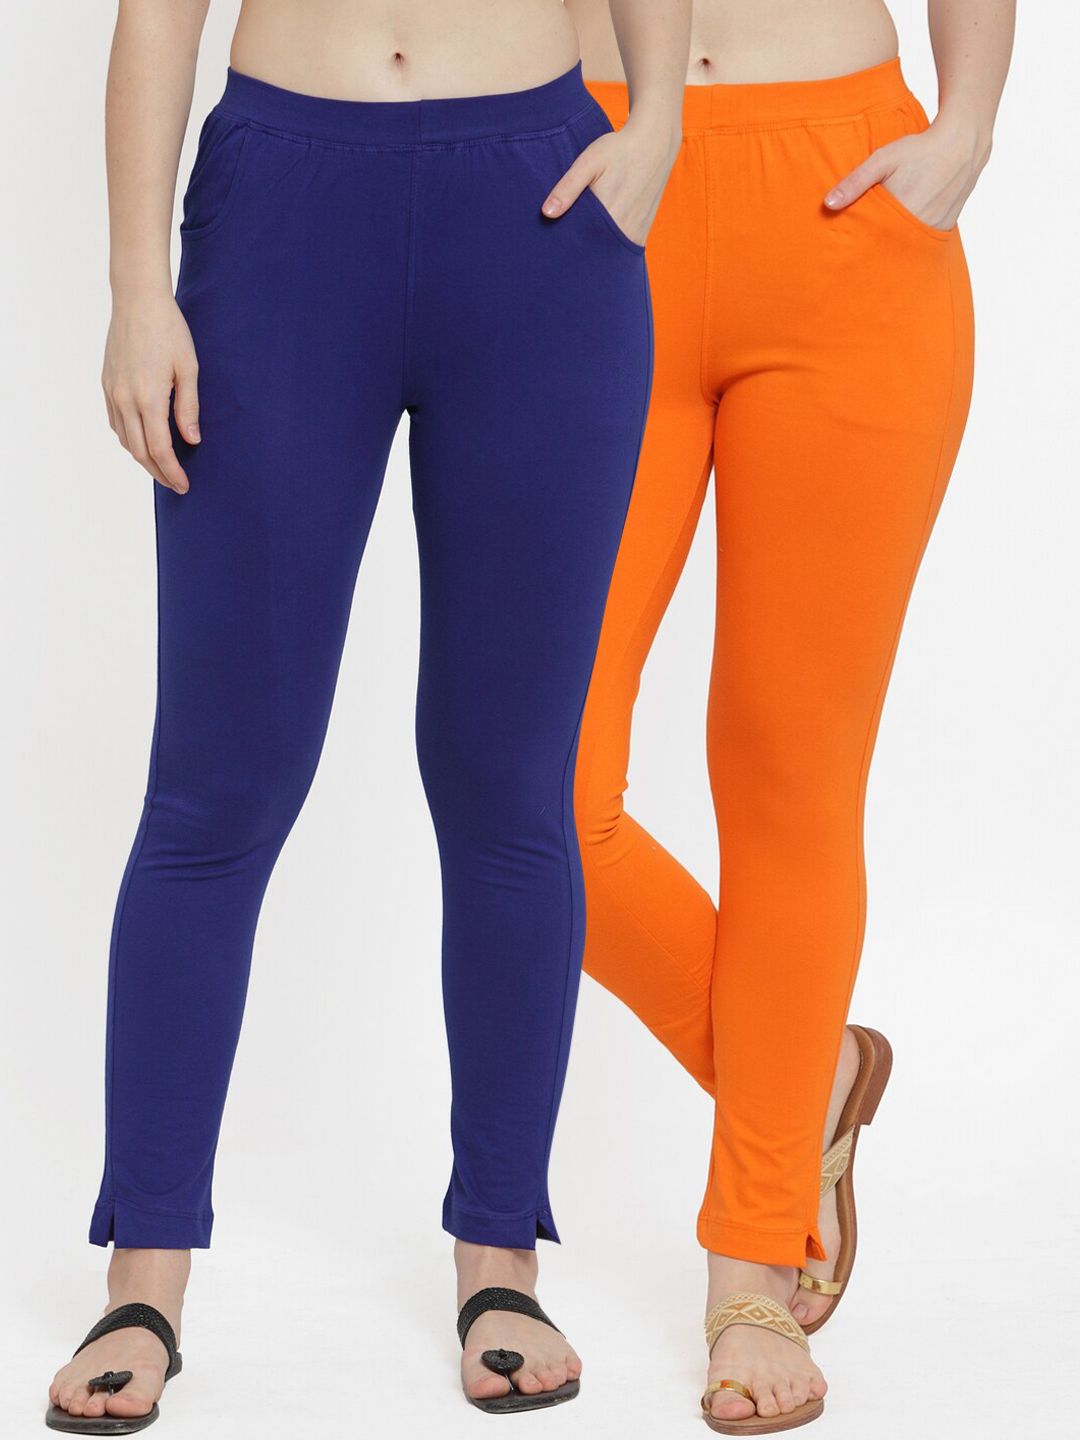 TAG 7 Women Pack of 2 Solid Ankle-Length Leggings Price in India